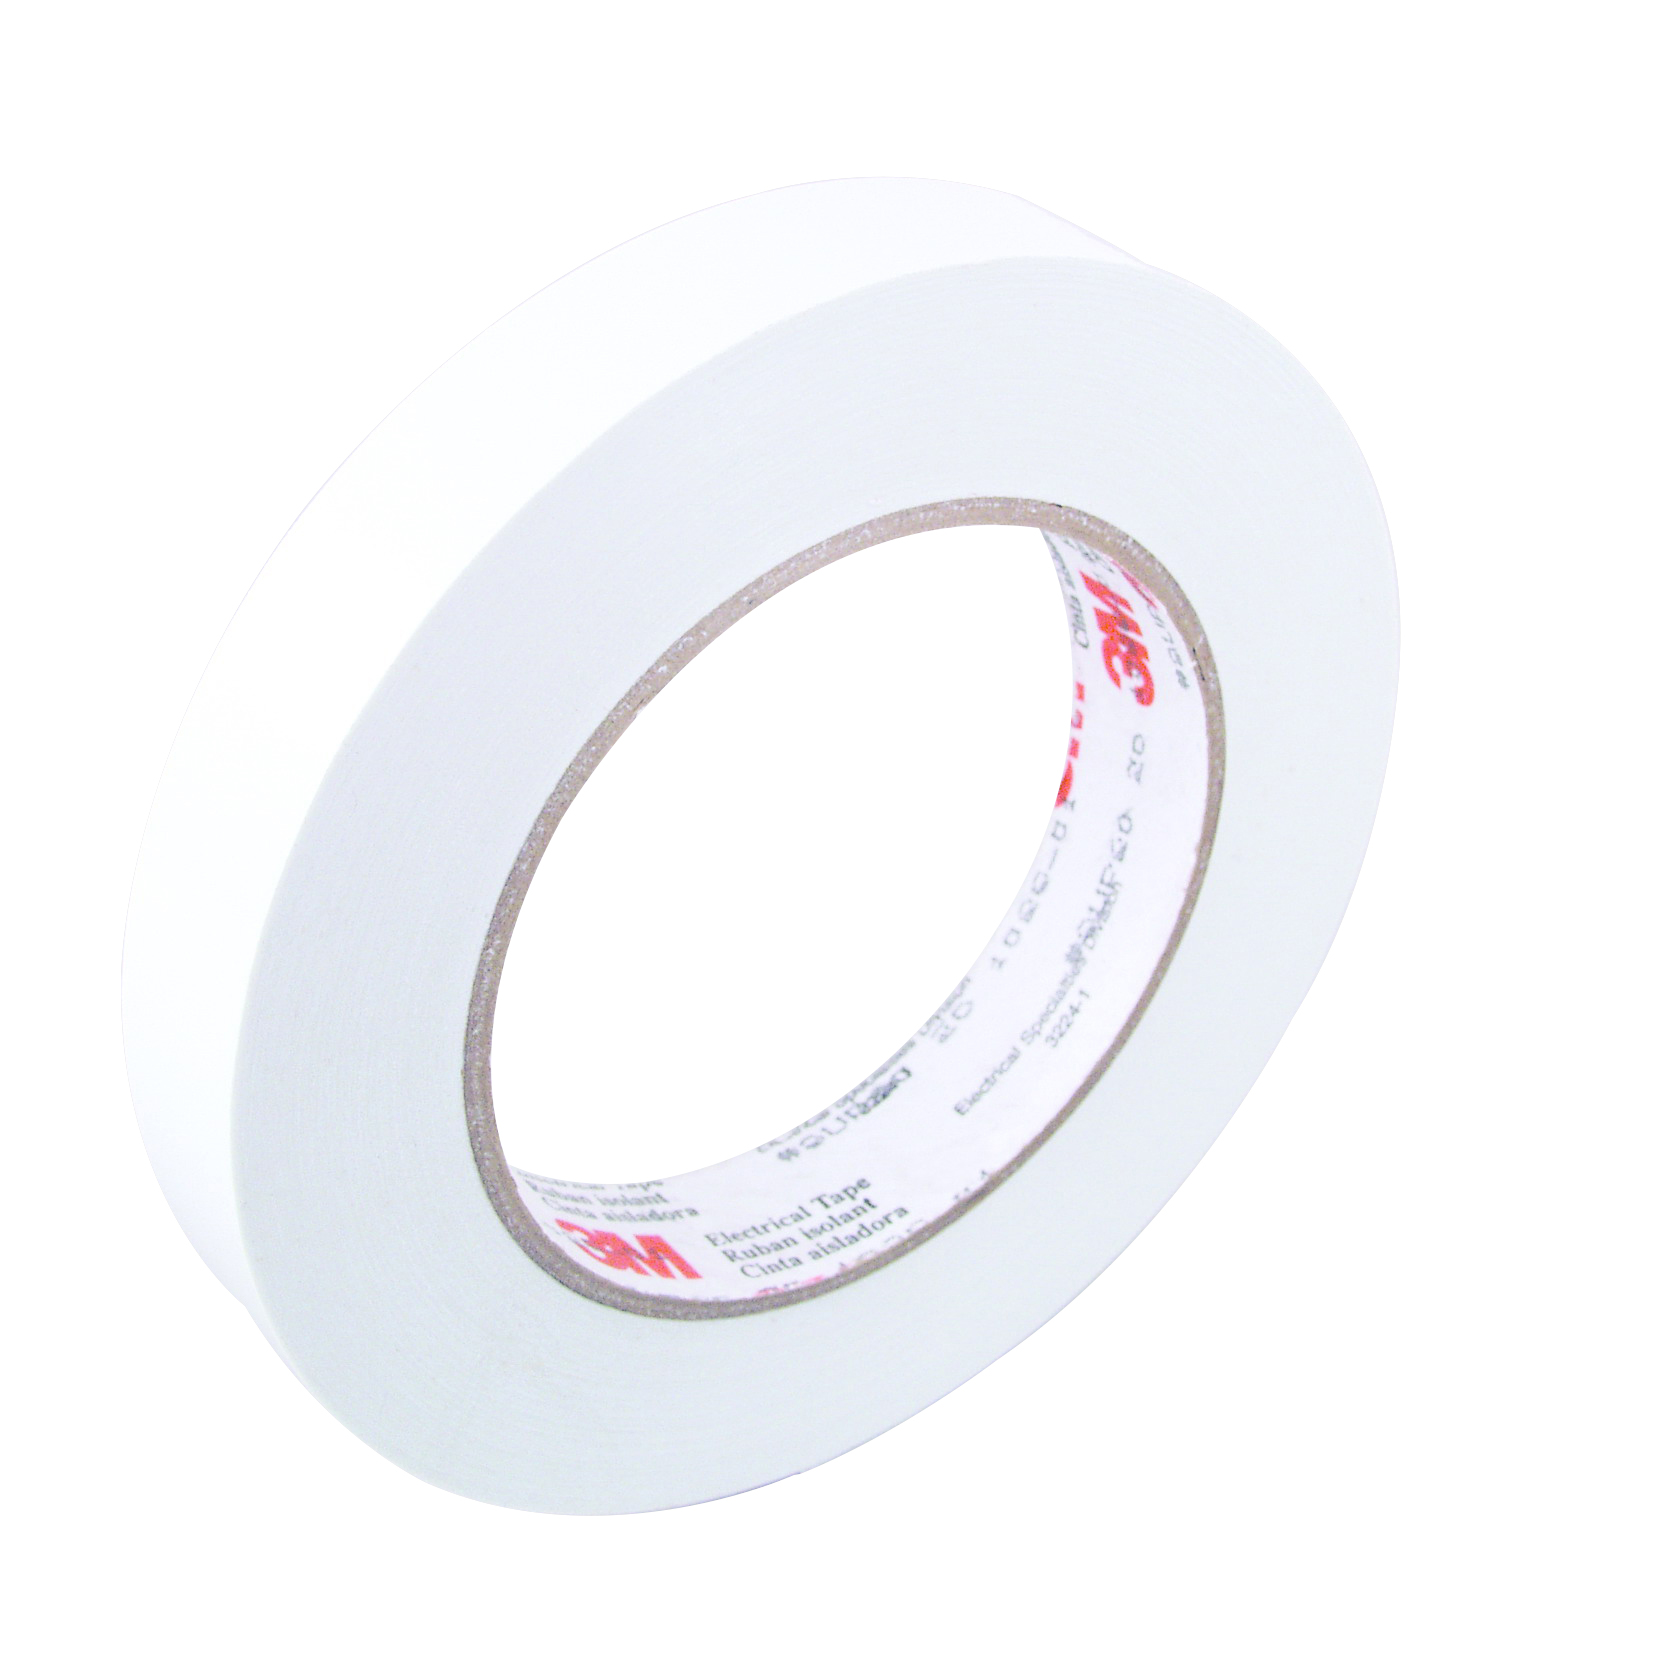 3M™ Epoxy Film Electrical Tape 1-3/4 in x 72 yds, White, Acrylic Adhesive,  3/4 in x 72 yds (19,05 mm x 66 m), 48/Case Aircraft 9360364